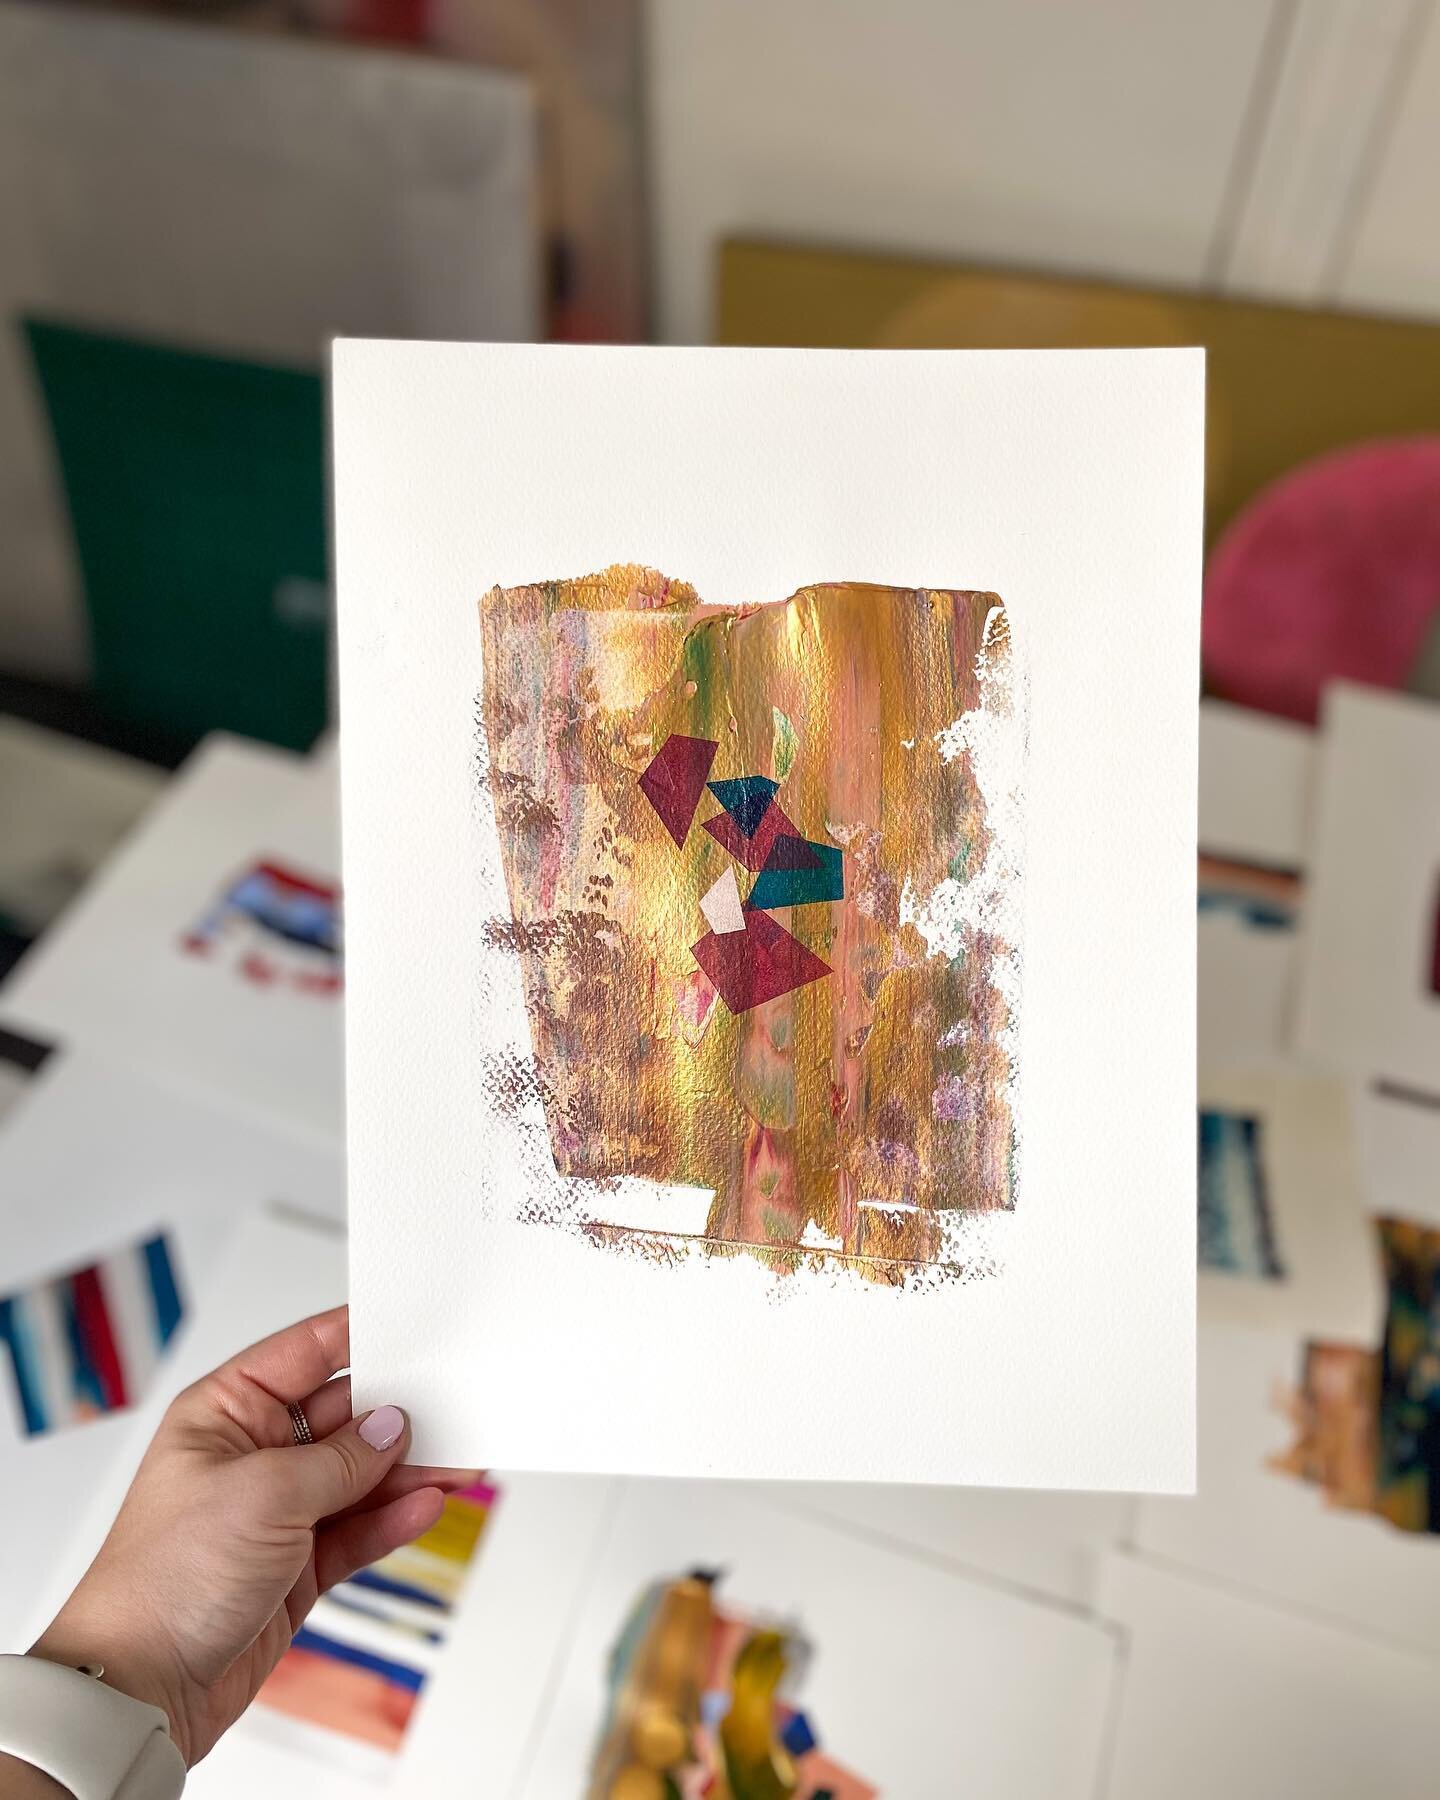 Hello October 🍁 (my favourite month) 
Another new study
Acrylic on water colour paper 
A4 
Colours in the studio for this month.... Gold, Burgandy, Deep Turquoise and Opera Rose
🍂
.
.
.
.
 #artoftheday #quickpainting #october #octobercolours #autum